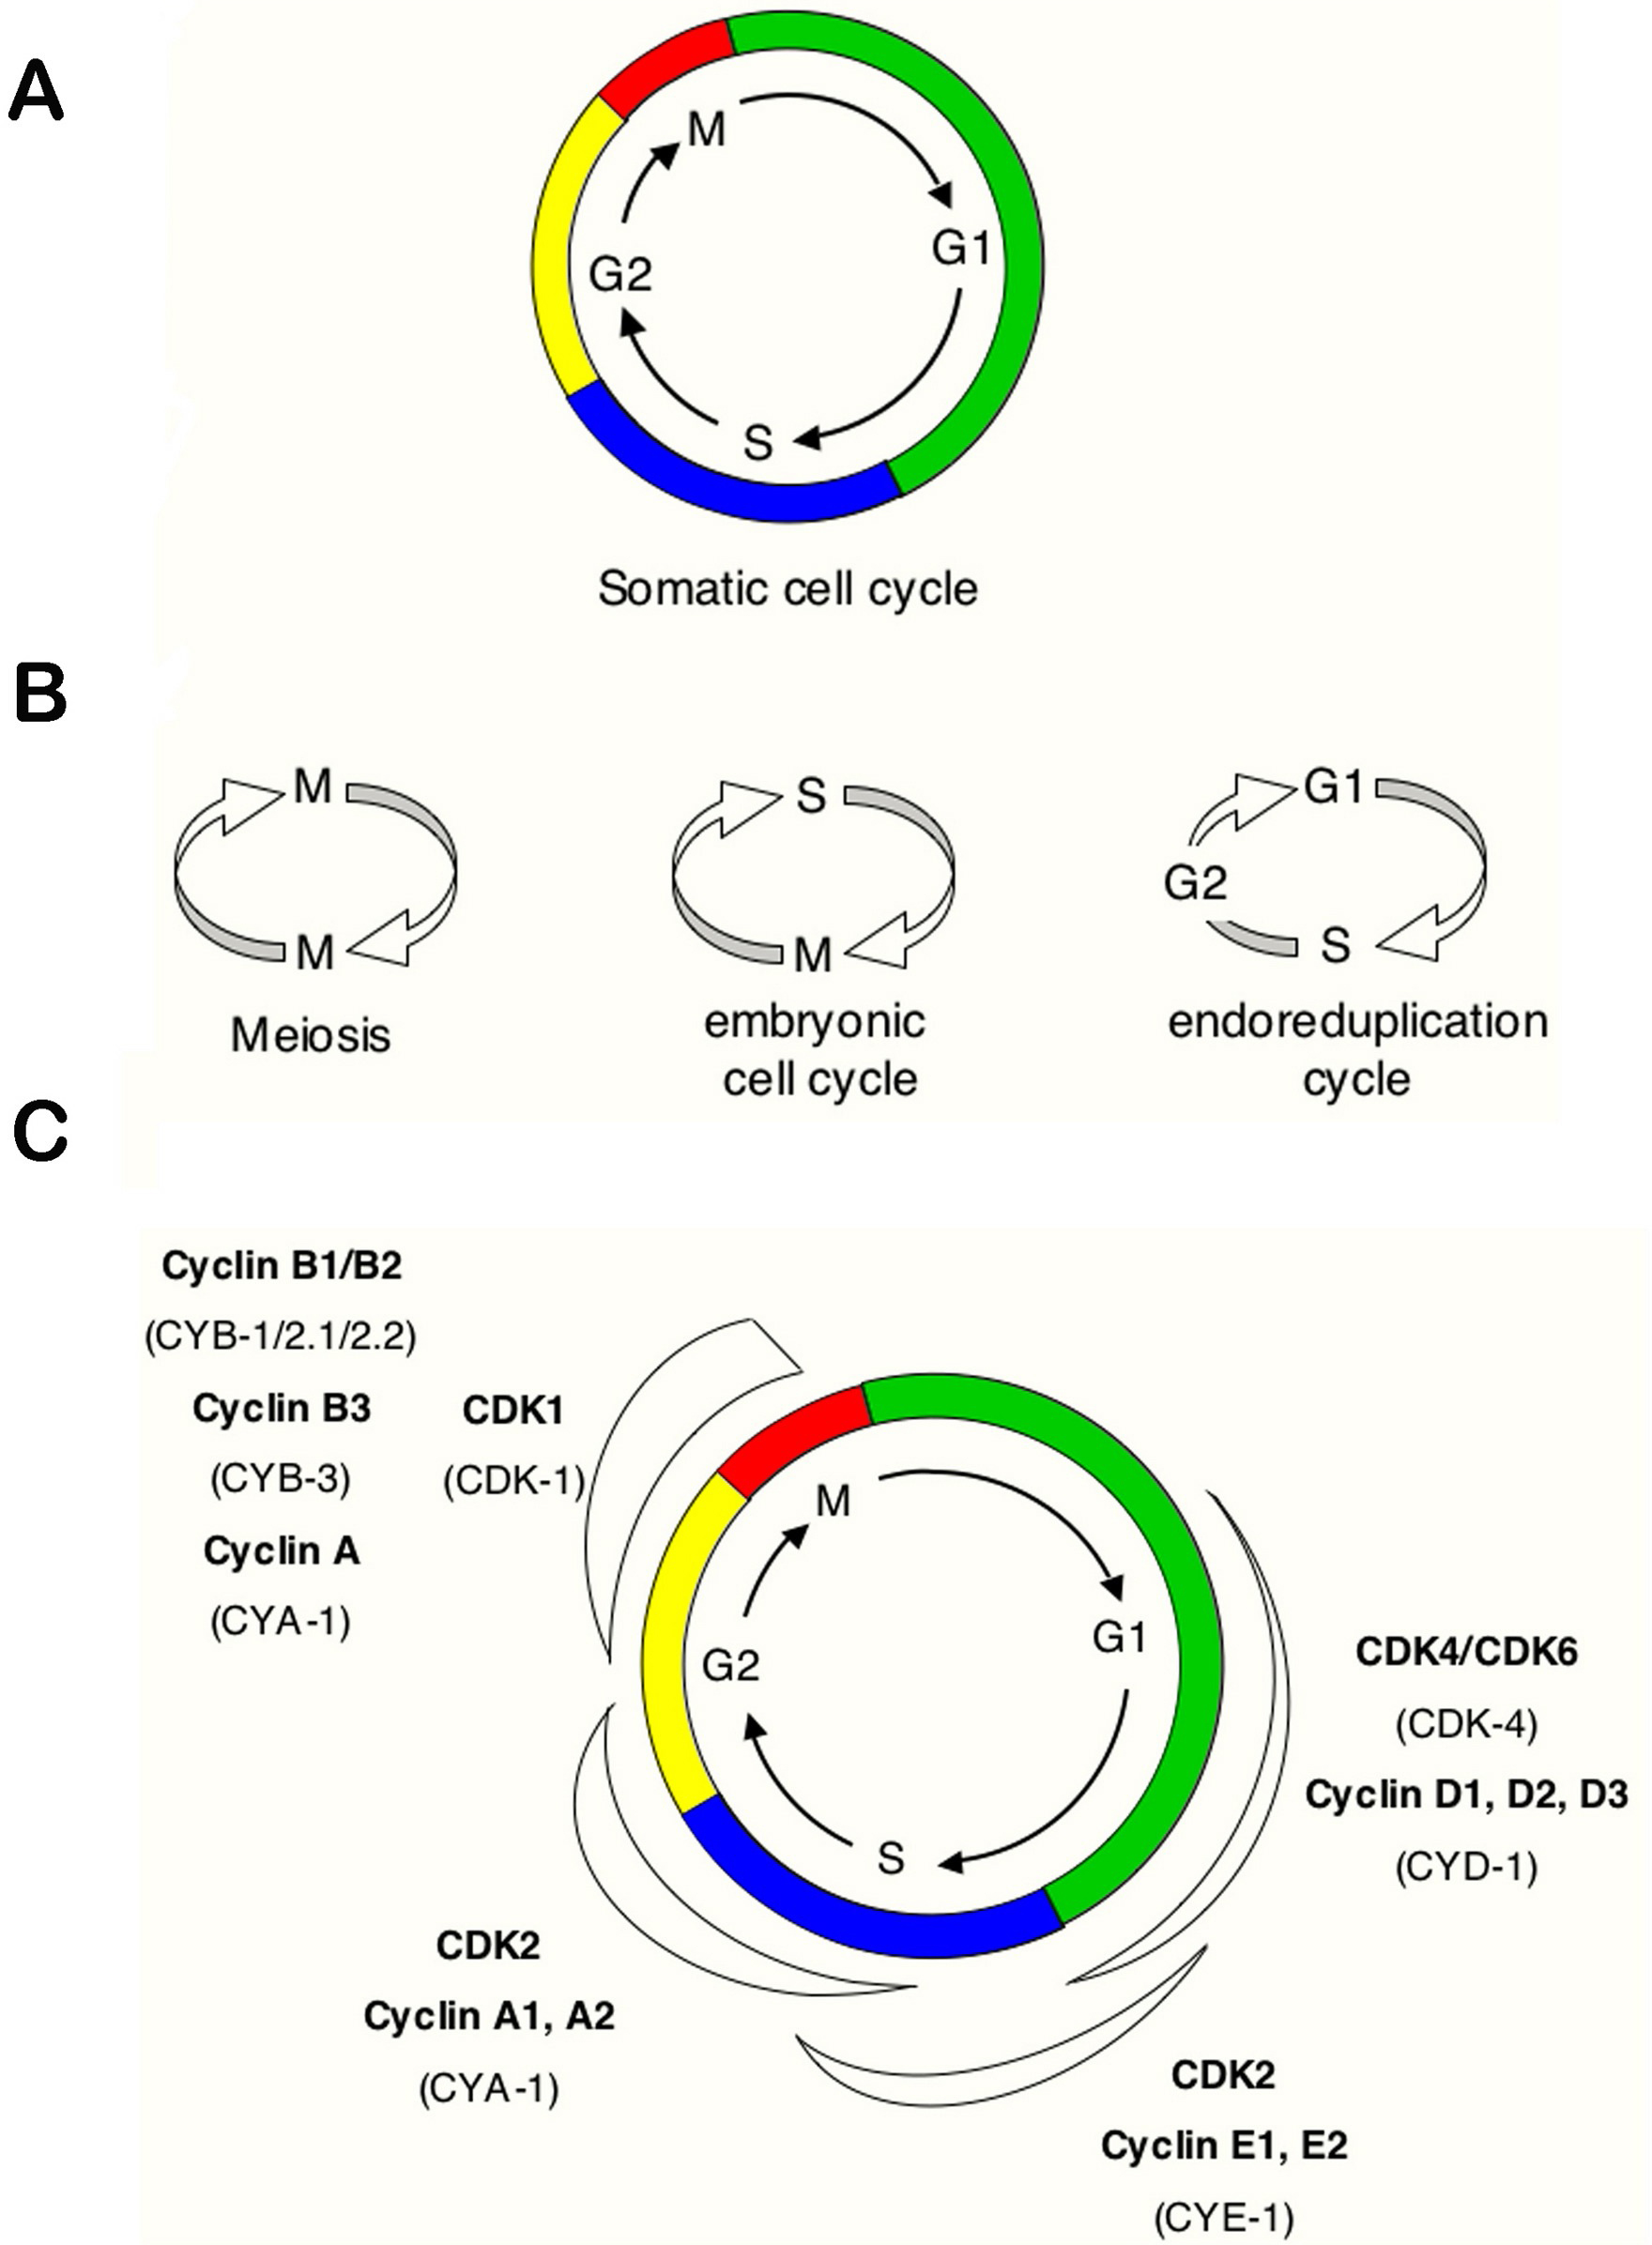 Cell-cycle regulation